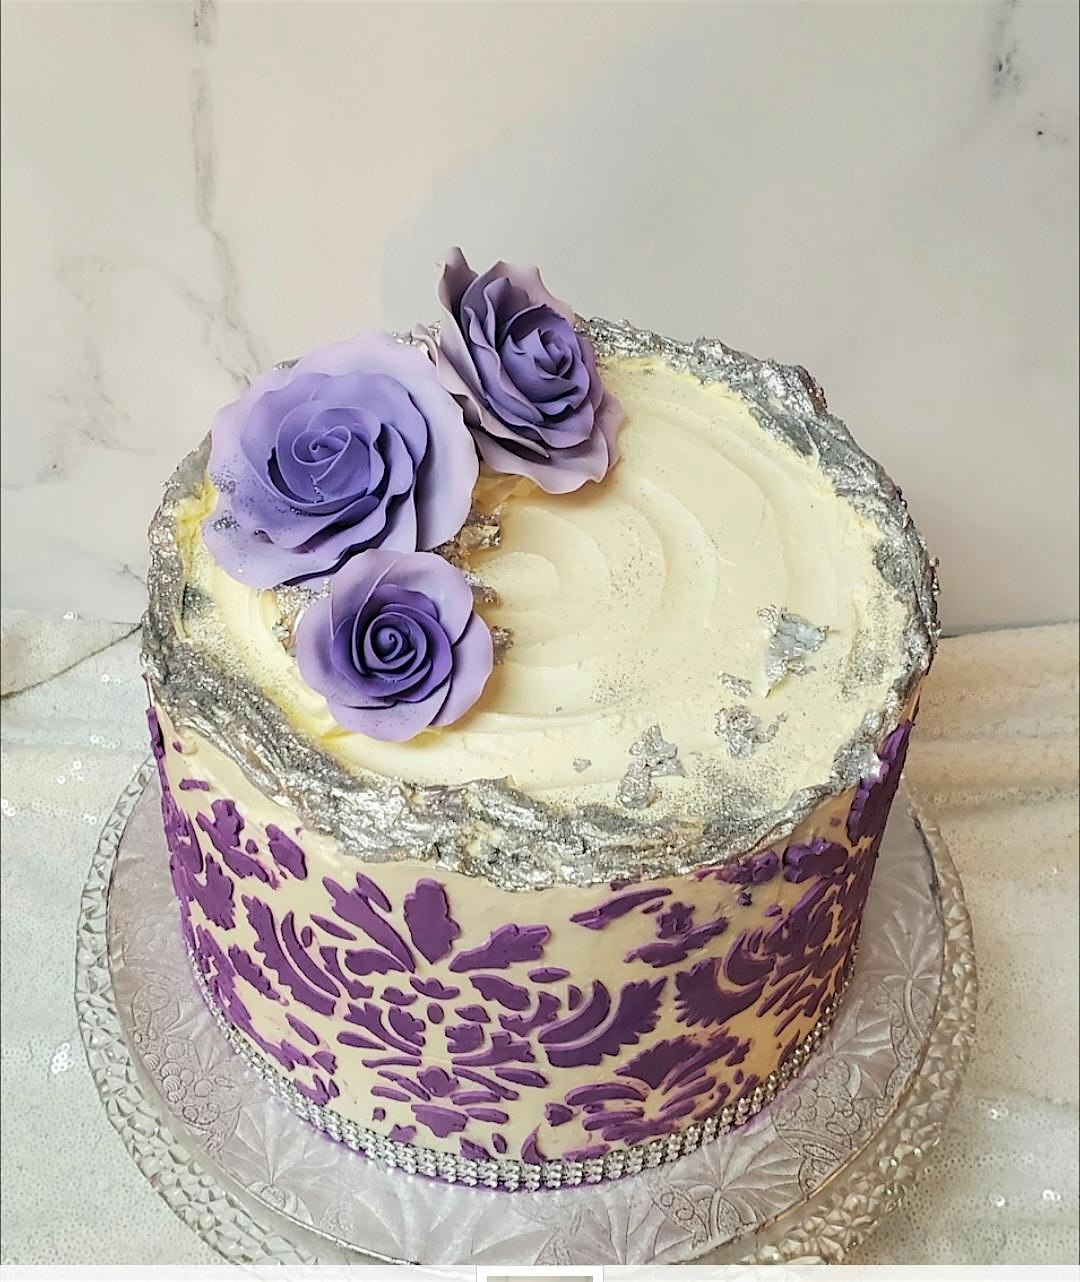 Beginner Cake Decorating with Buttercream and Stencil Designs